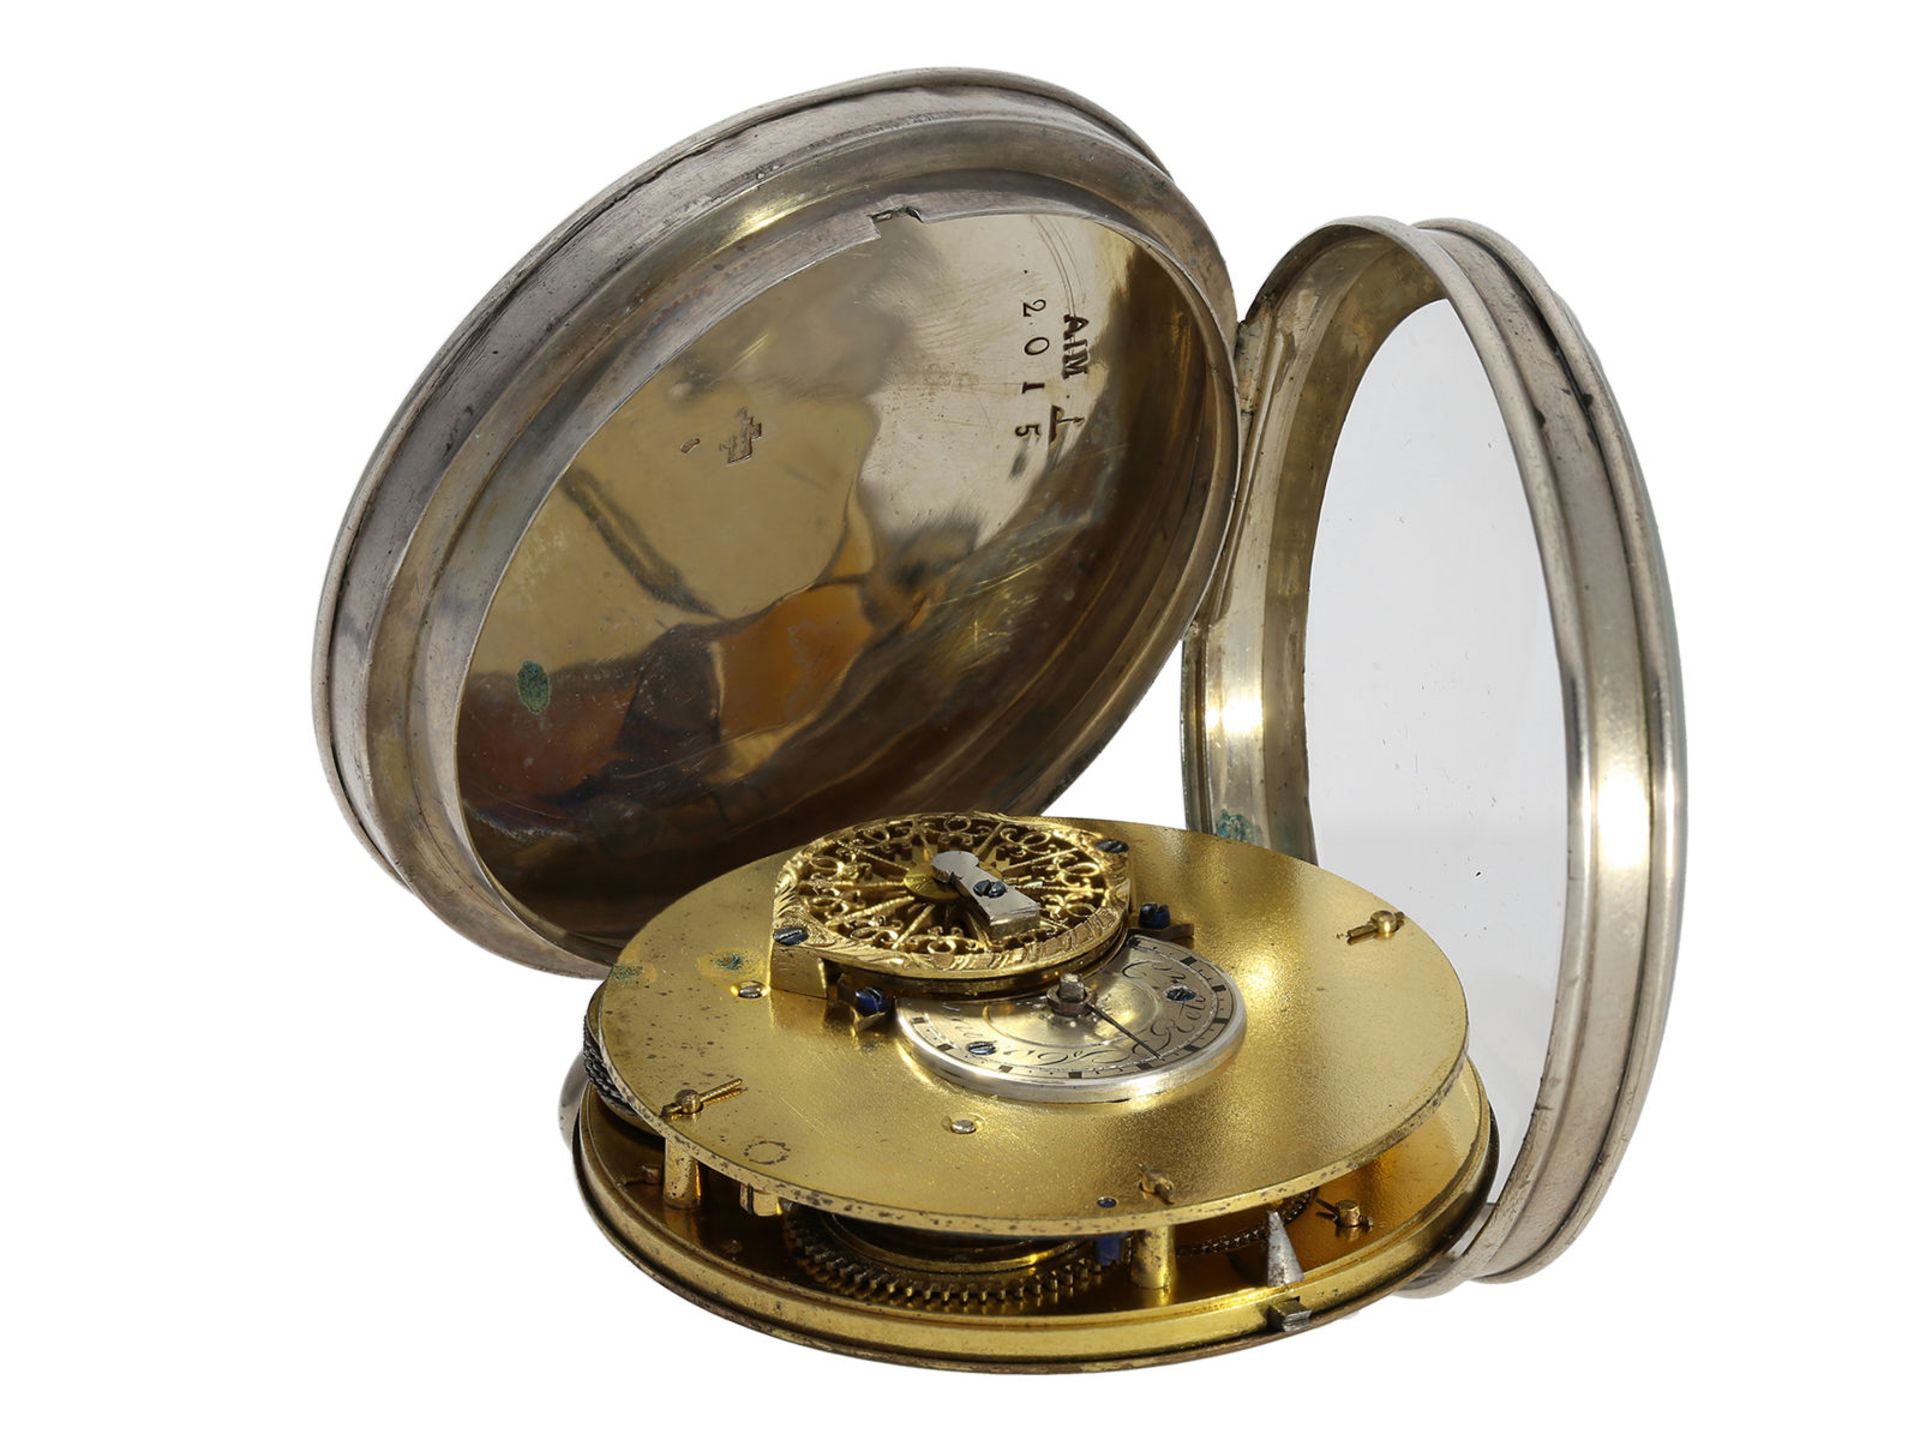 Pocket watch: rare verge watch with calendar and centre seconds, probably France around 1800 - Image 5 of 5